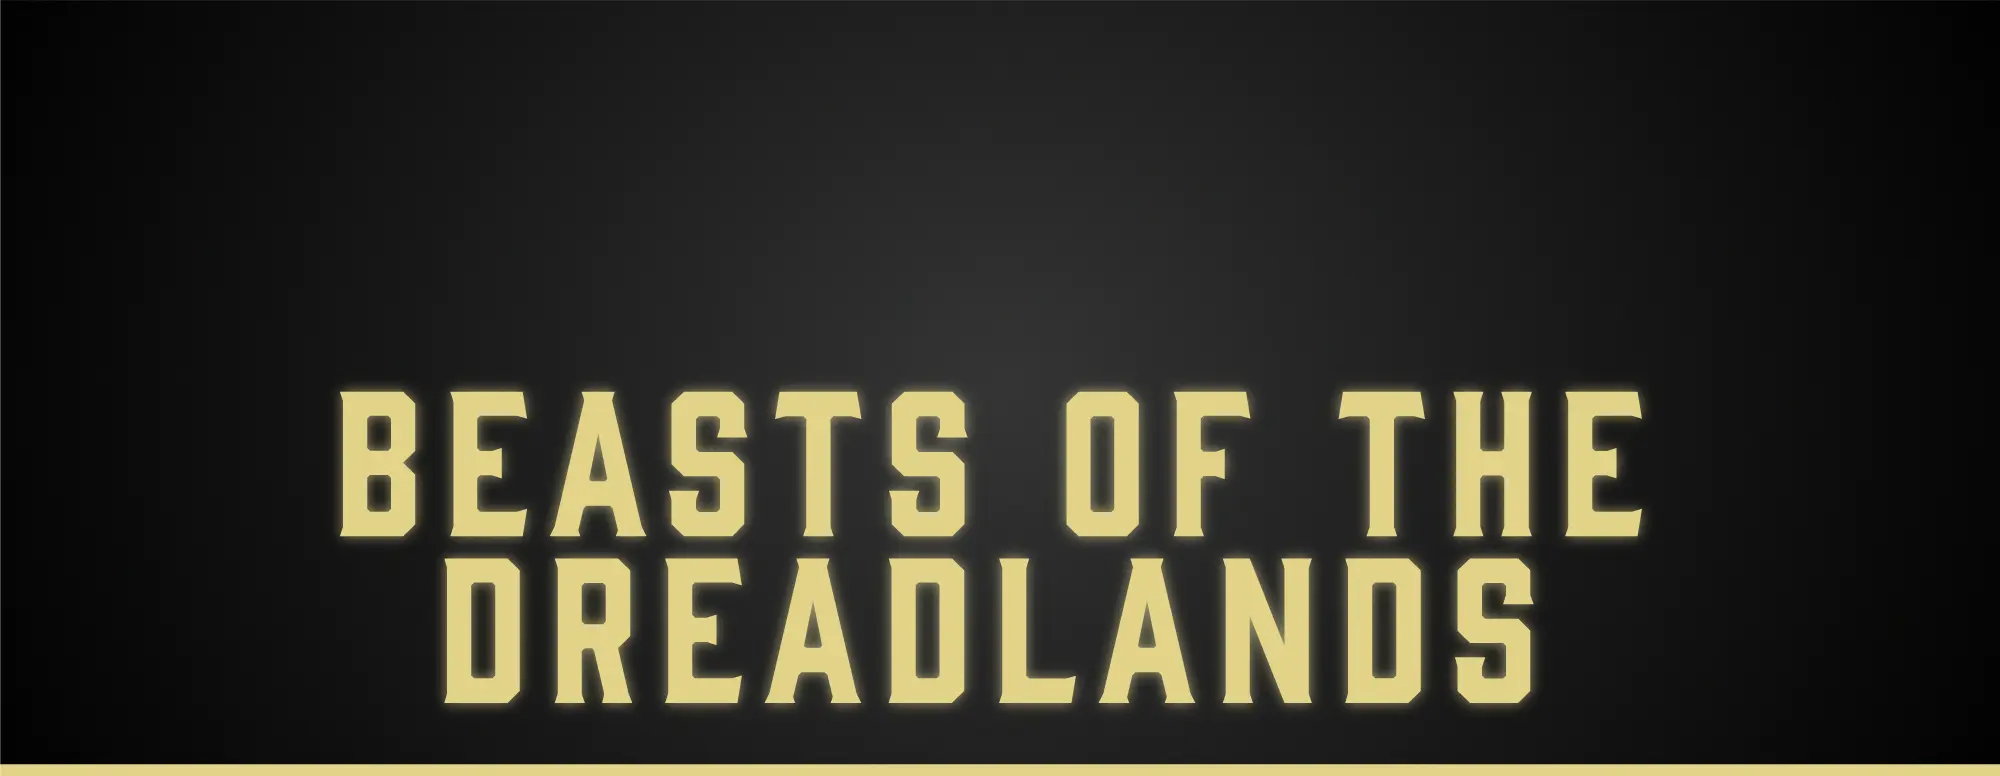 Beasts of the Dreadlands are a set of Collectible NFTs by Digi Caps. This NFT Collection is also on OpenSea